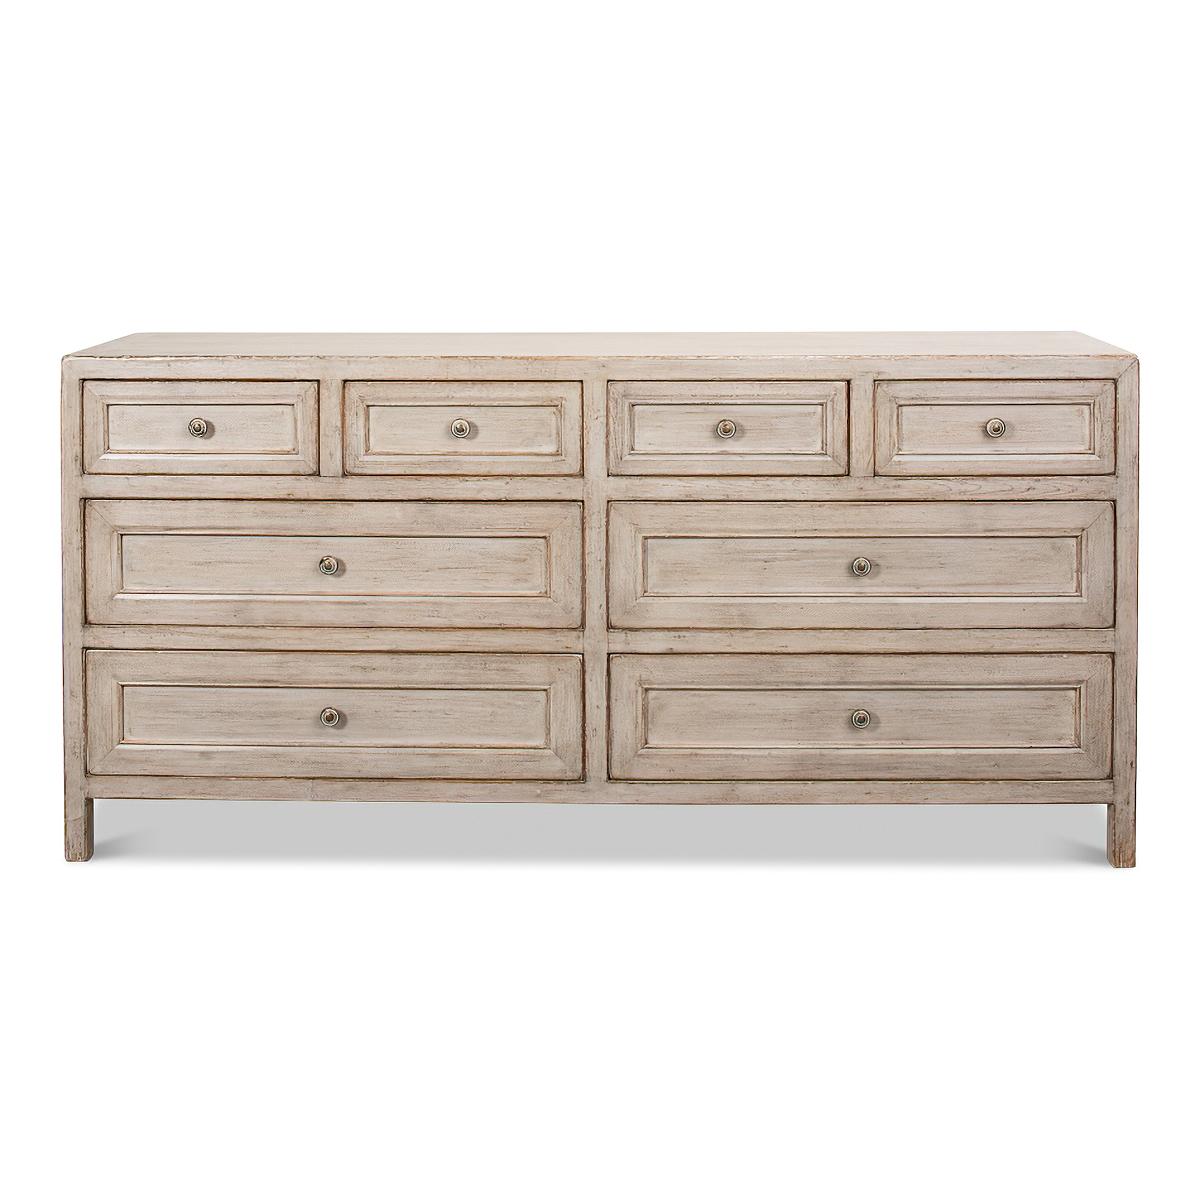 A Rustic painted eight-drawer dresser. Reclaimed pine painted and distressed with four short and four long drawers. Influenced by antique Chinese furniture, this dresser is ideal in modern or traditional settings.

Dimensions: 71